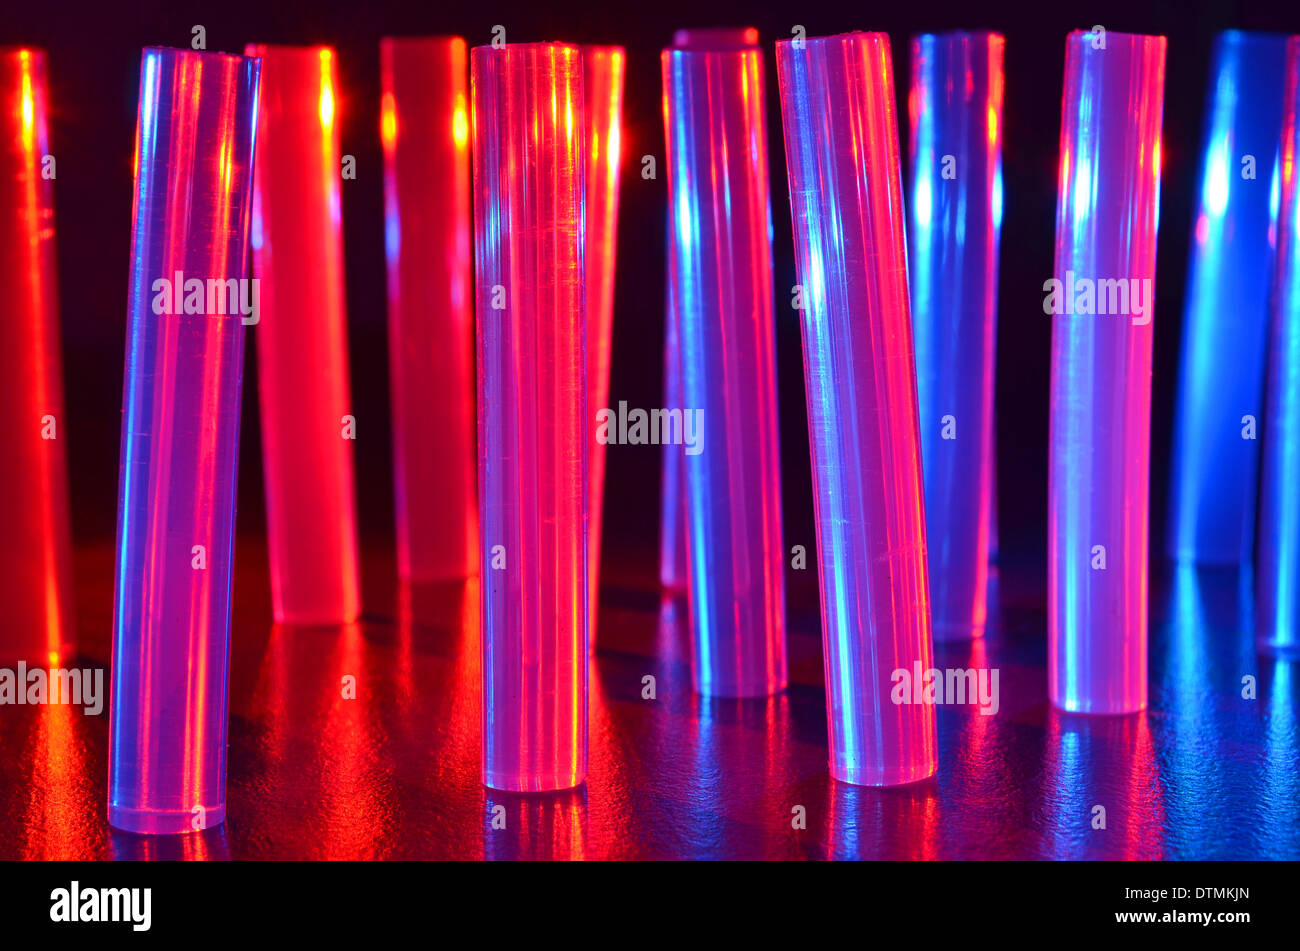 Glue gun sticks standing on end and lit with red and blue LED lights Stock Photo